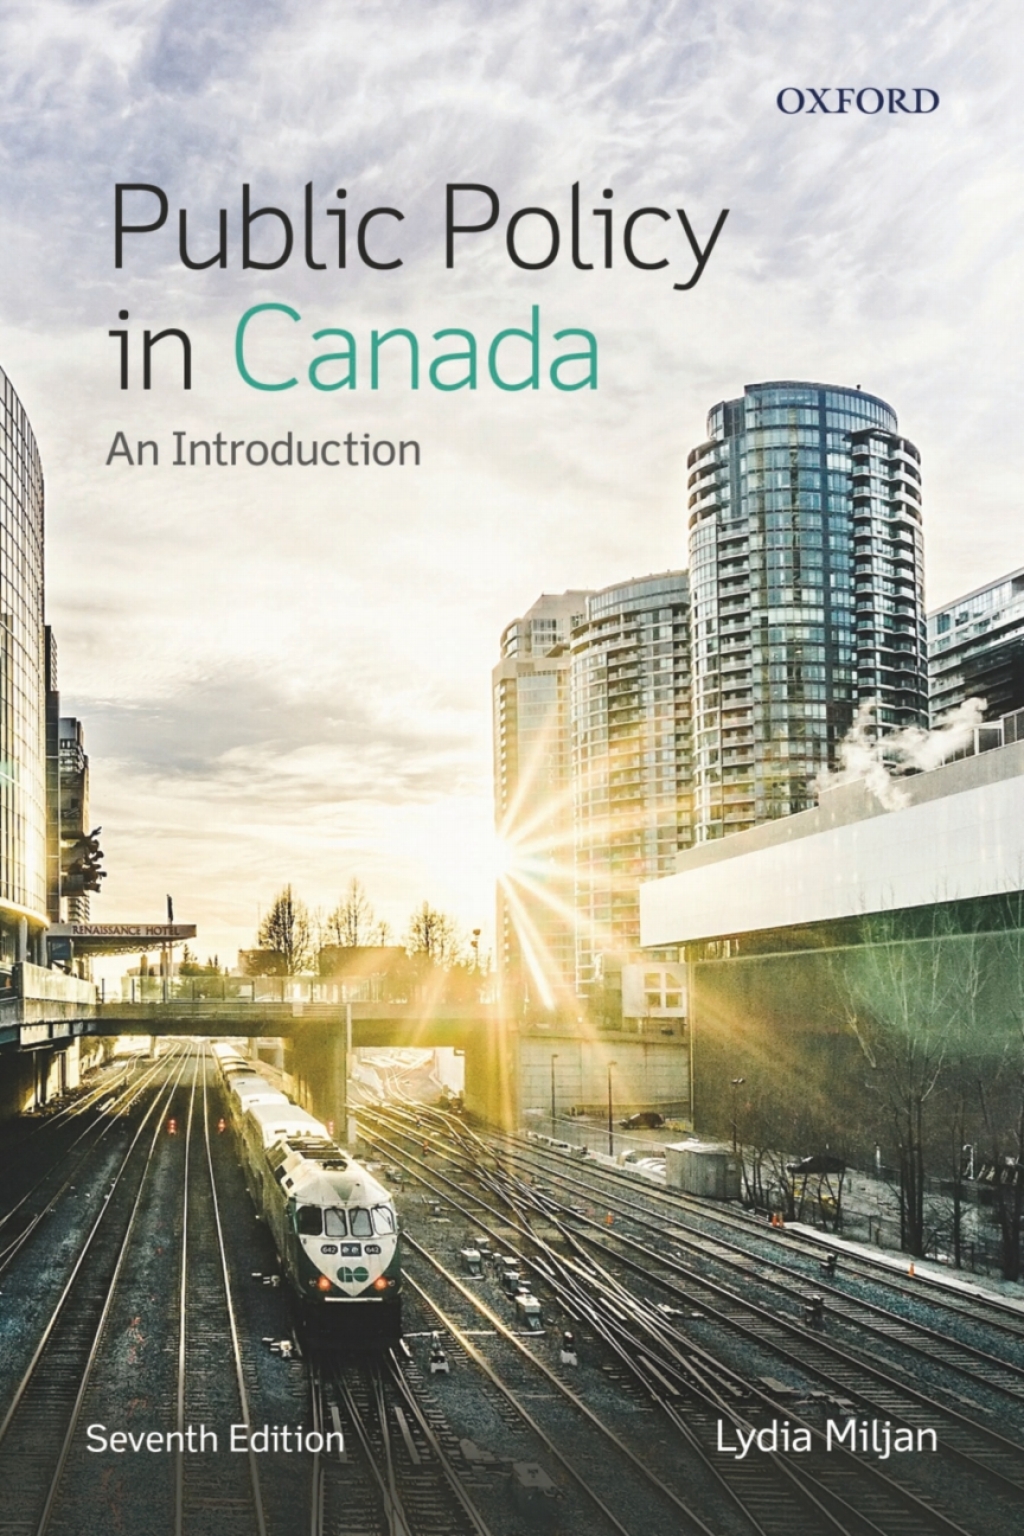 ISBN 9780199025541 product image for Public Policy in Canada: An Introduction - 7th Edition (eBook Rental) | upcitemdb.com